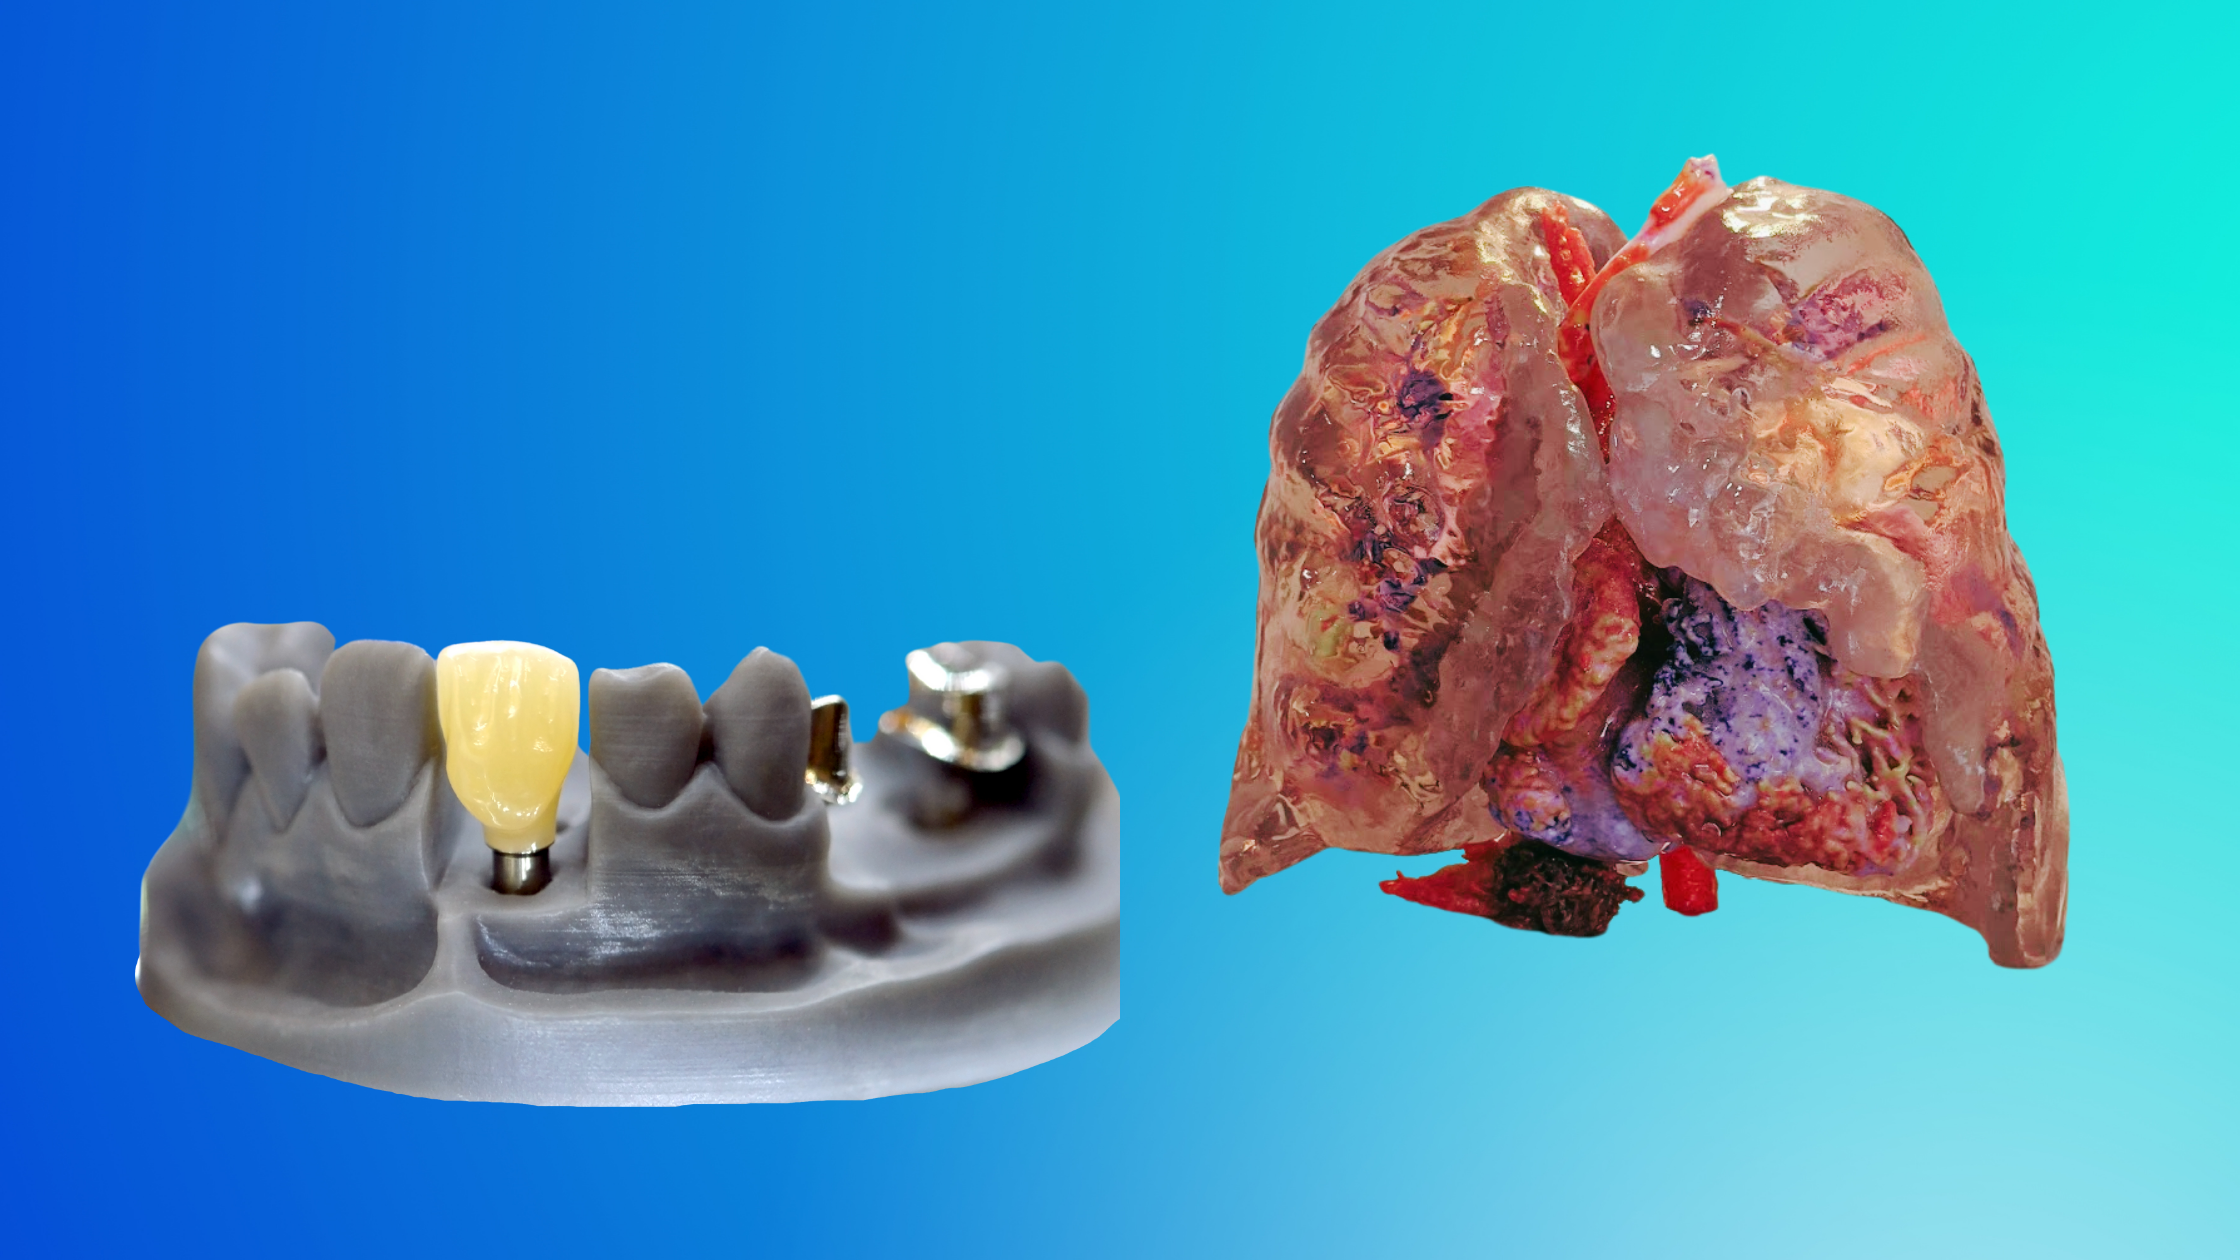 3D printed tooth and 3D printed anatomical model.